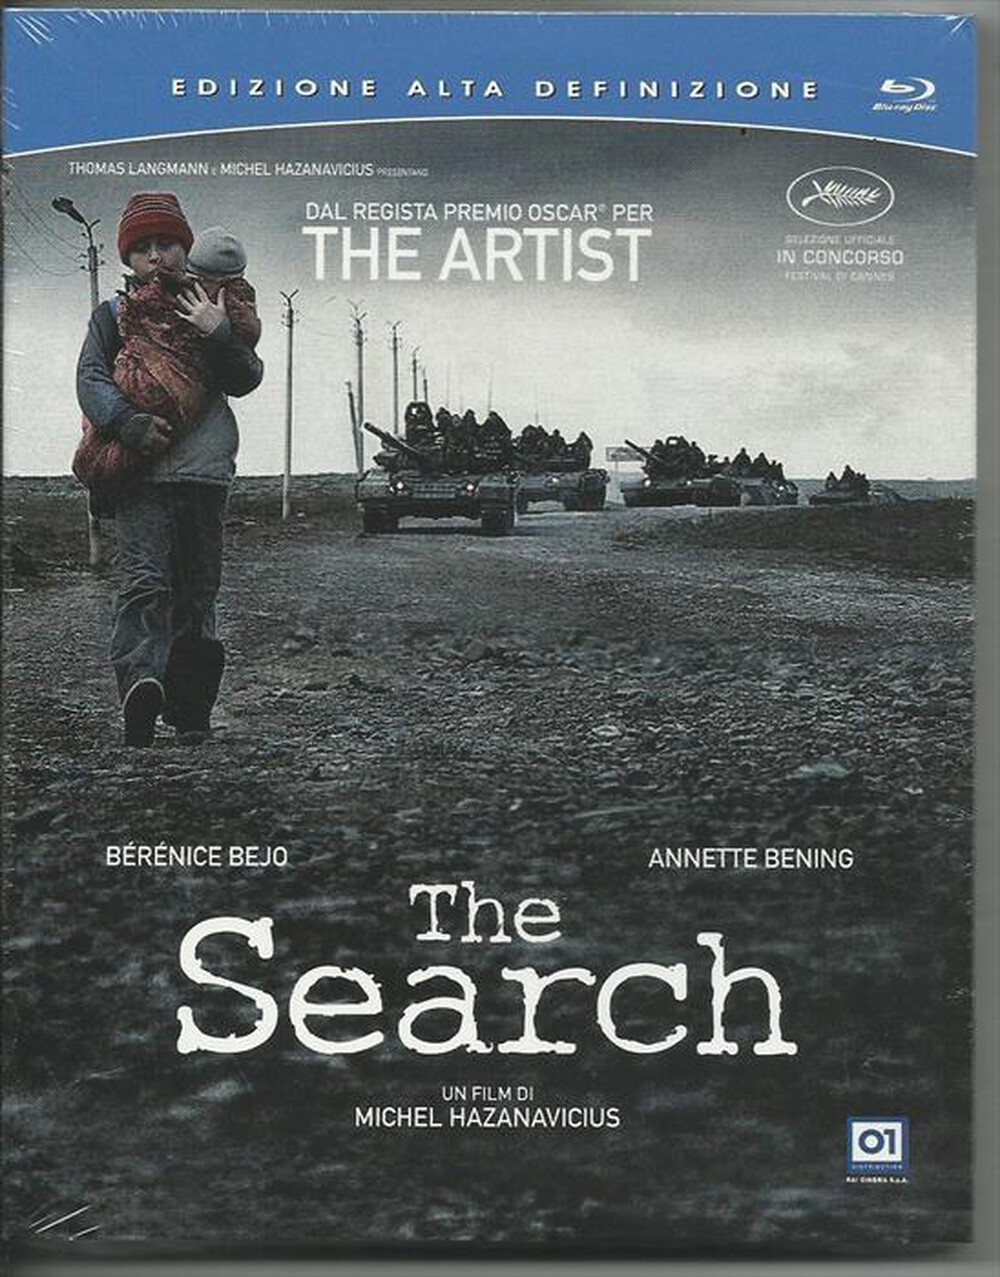 "EAGLE PICTURES - Search (The)"